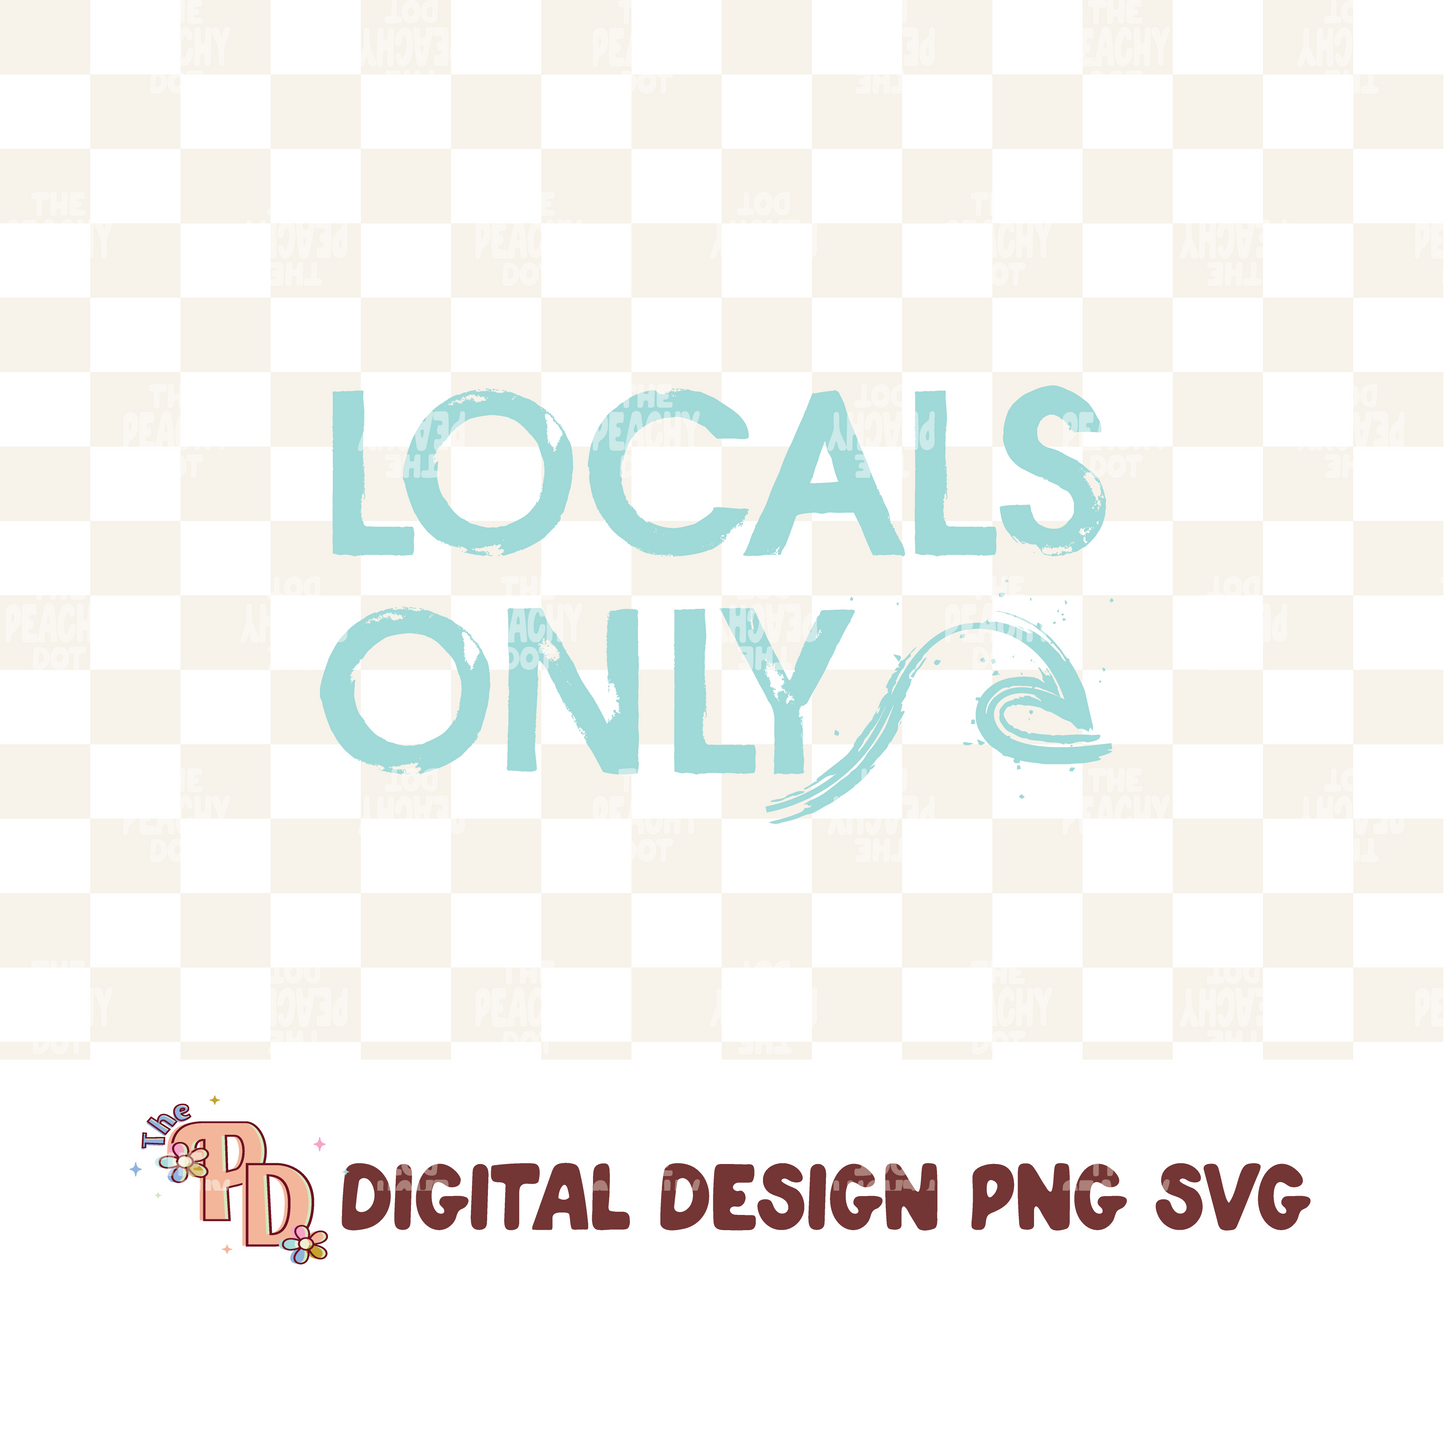 Locals Only Png Svg